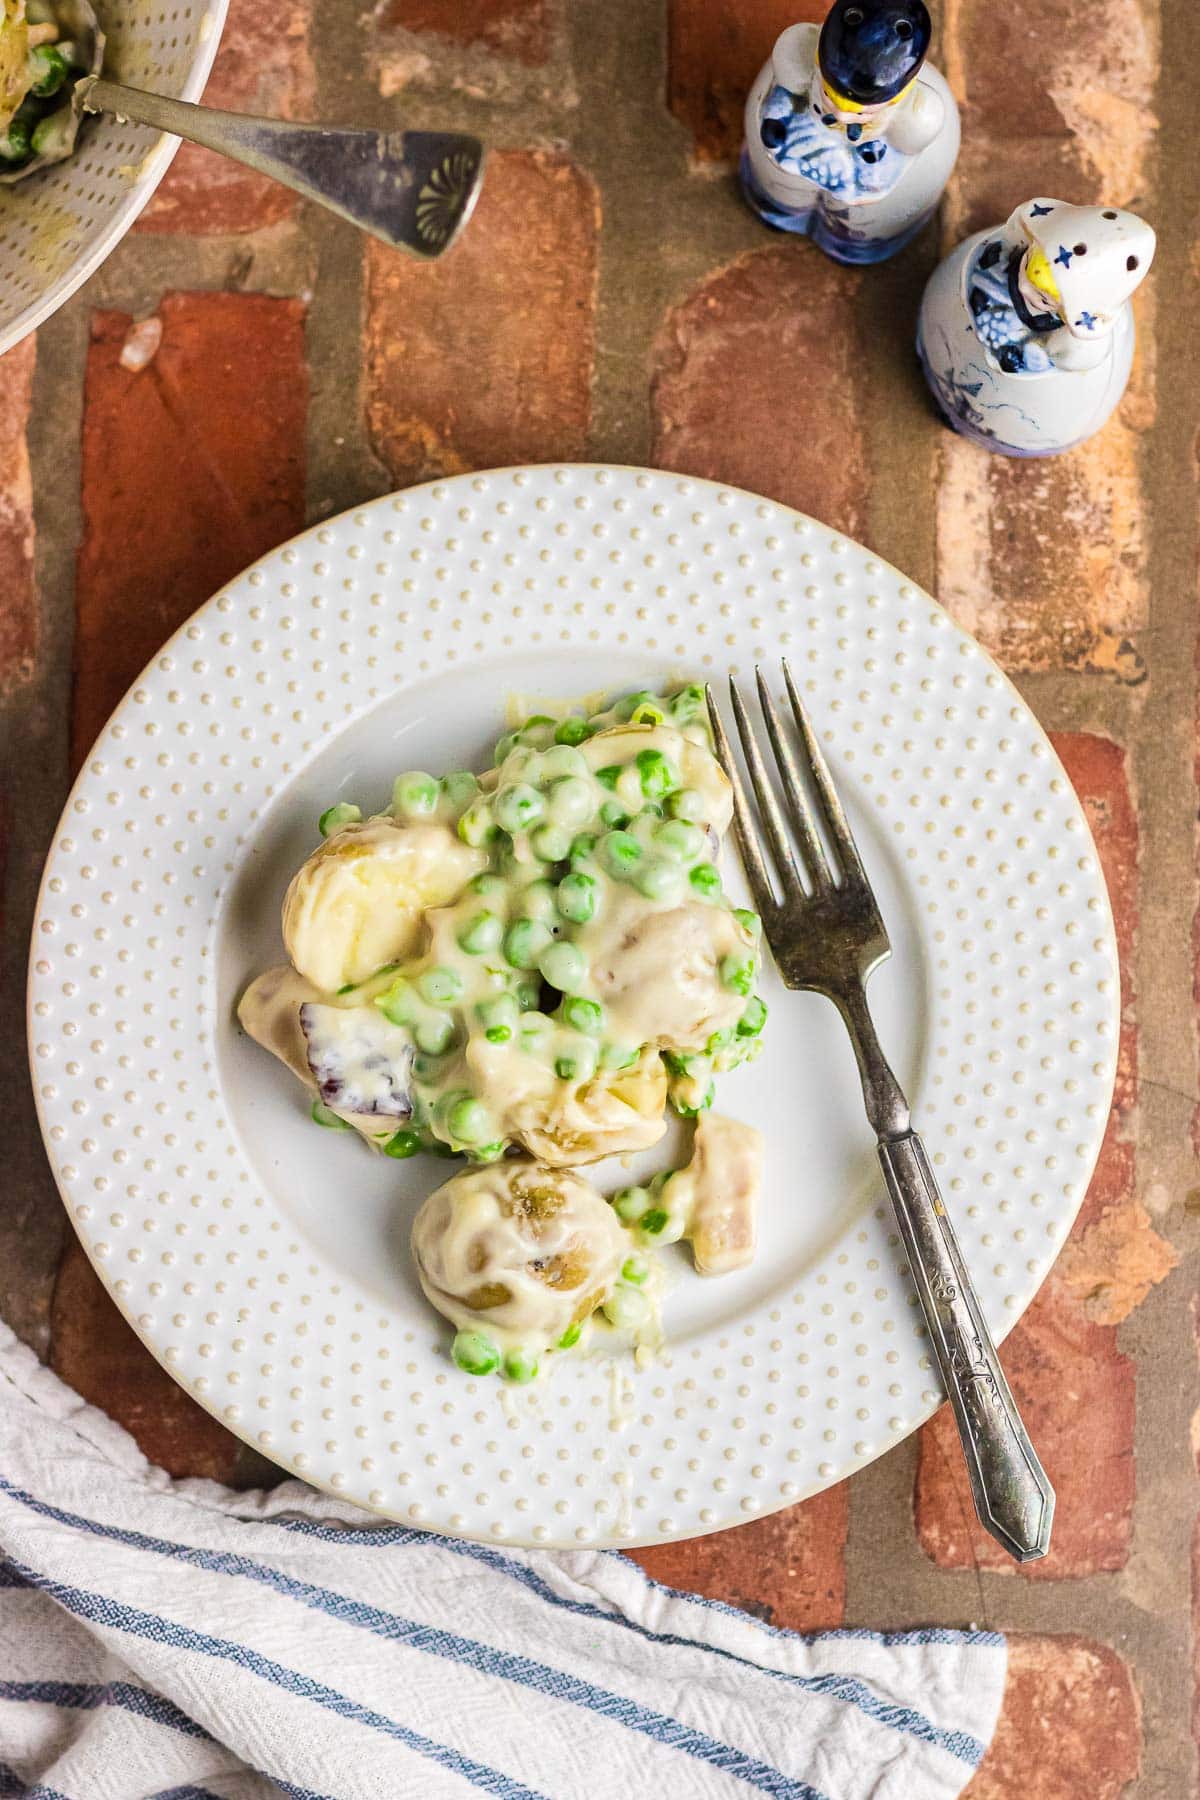 A plate of creamed potatoes and peas.